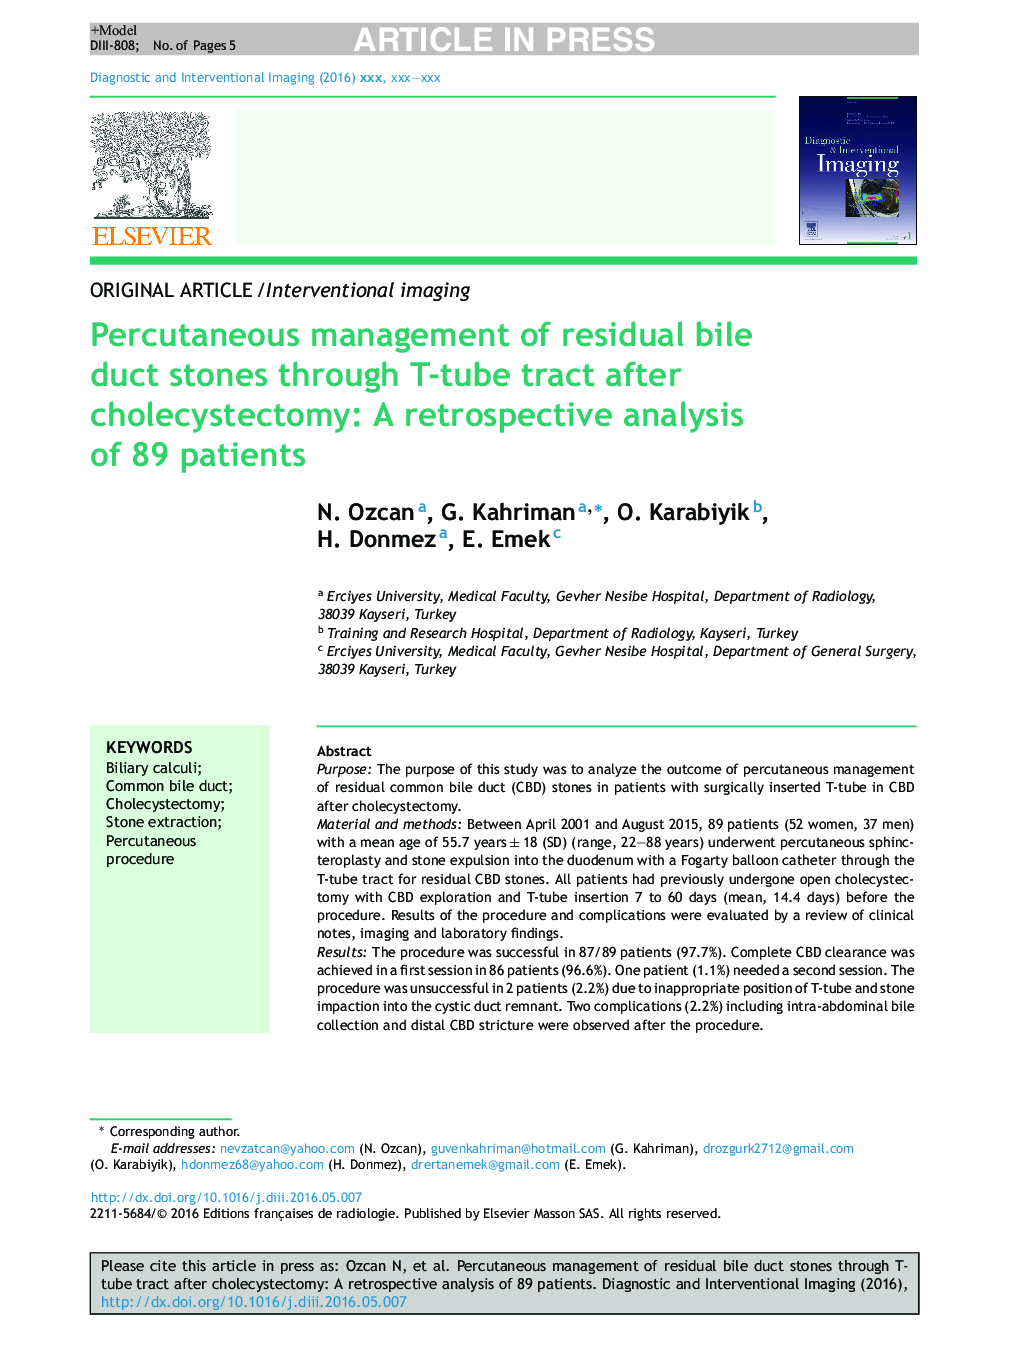 Percutaneous management of residual bile duct stones through T-tube tract after cholecystectomy: A retrospective analysis of 89 patients